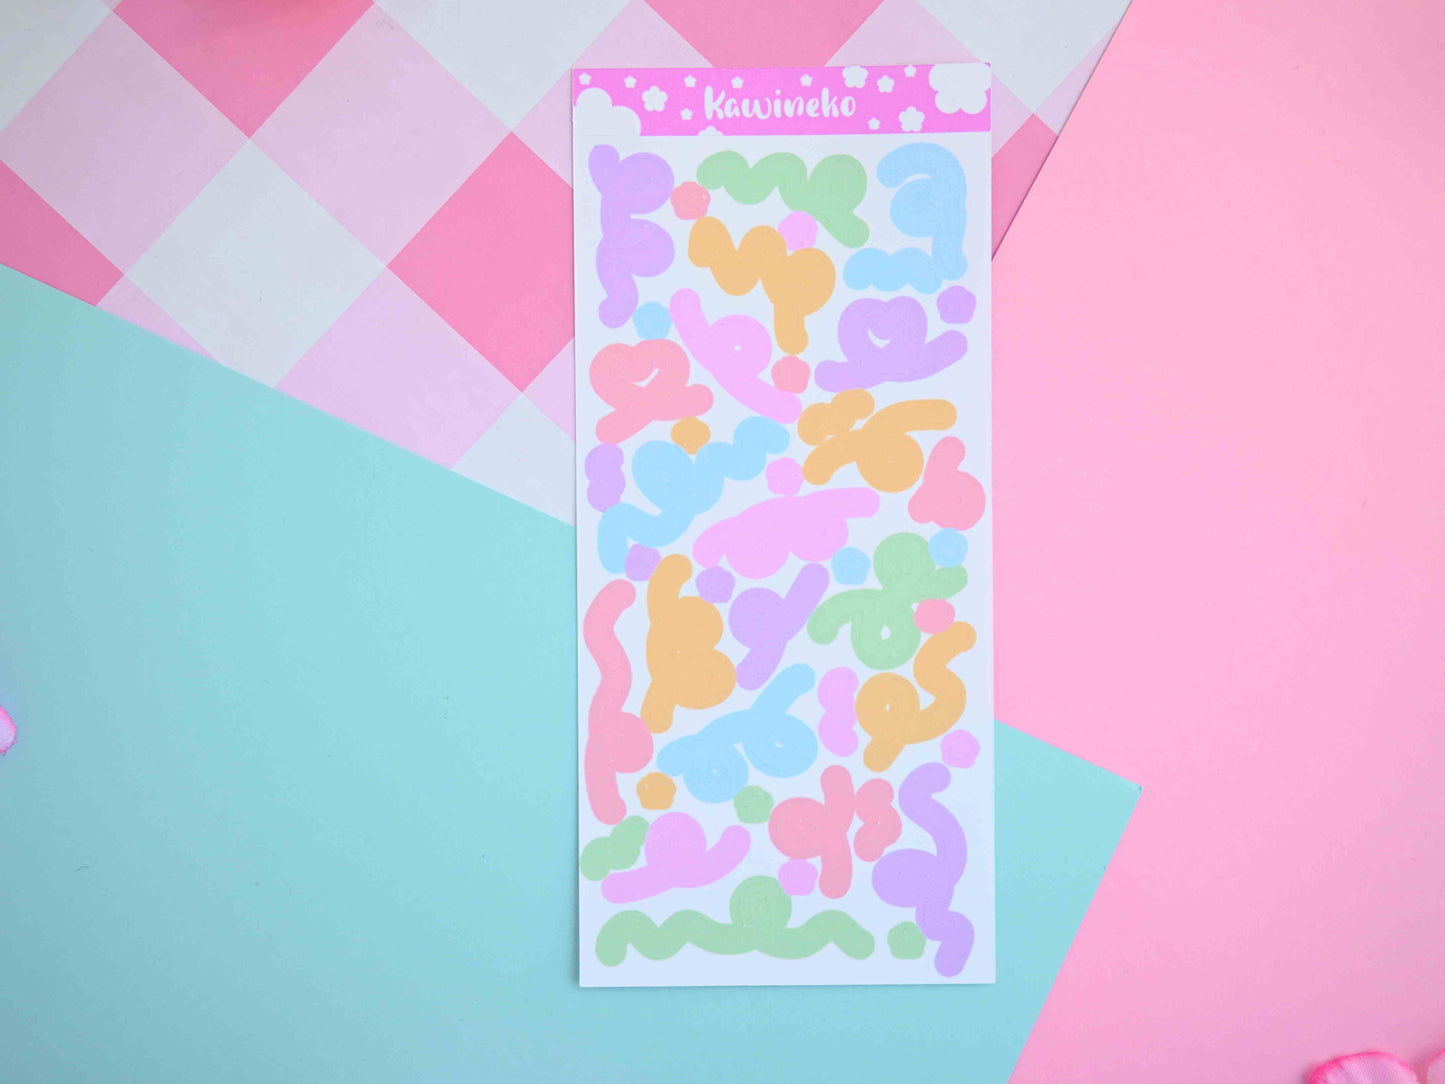 Spring bundle deco sticker sheet core colorful moon stars ribbons